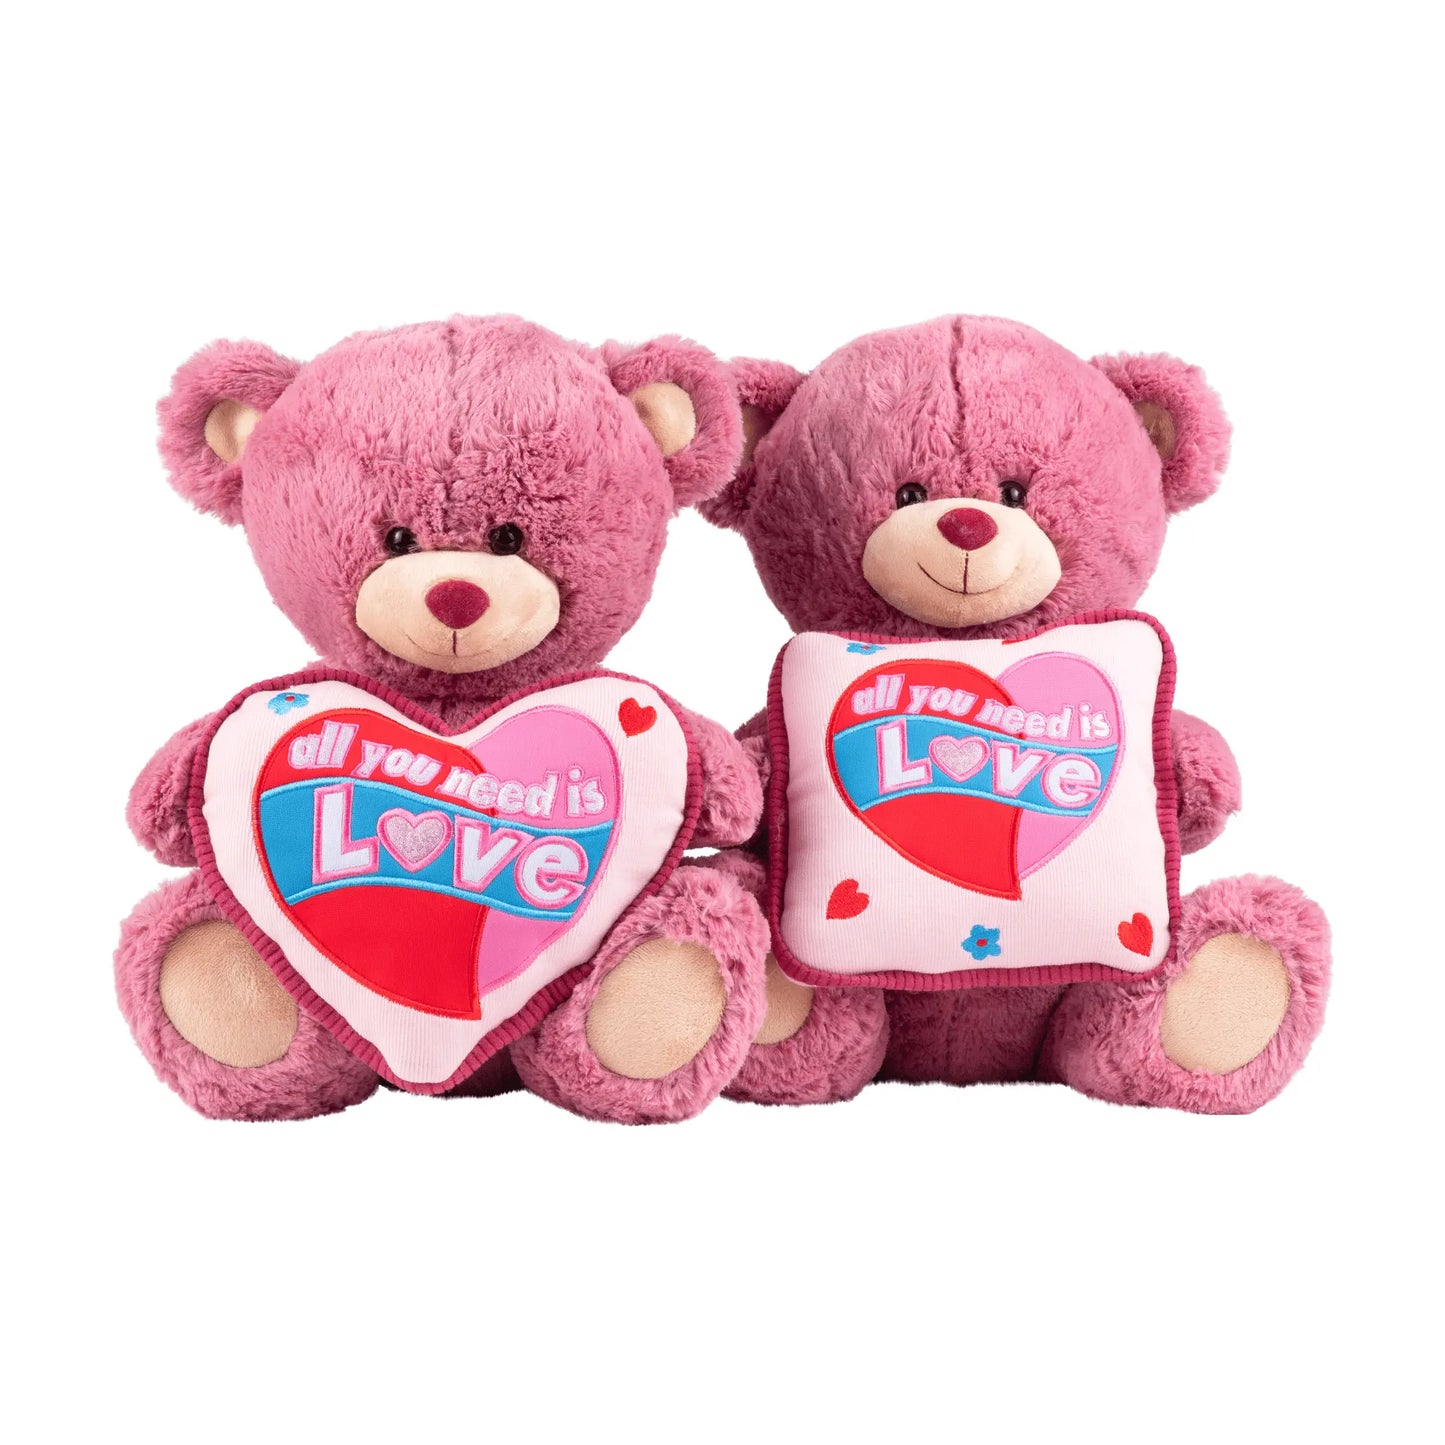 All you need is love bear 21 cm